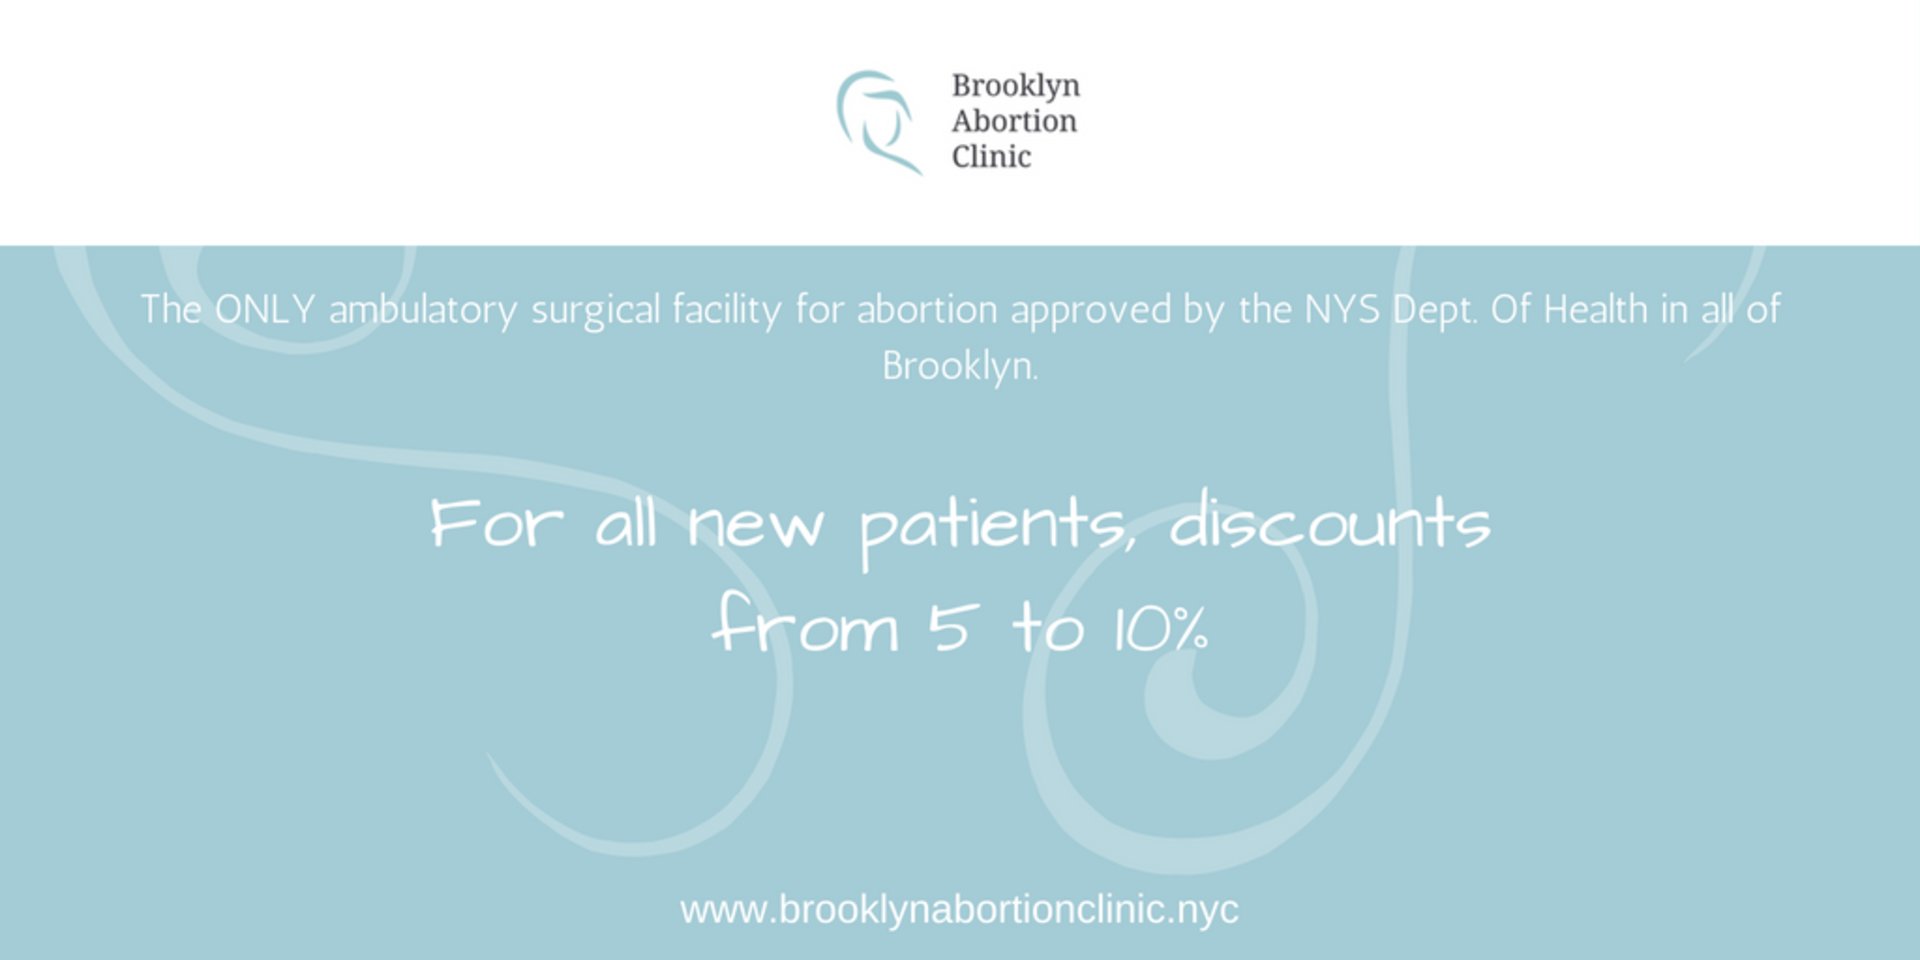 Discount for NEW Patients from Brooklyn Abortion Clinic